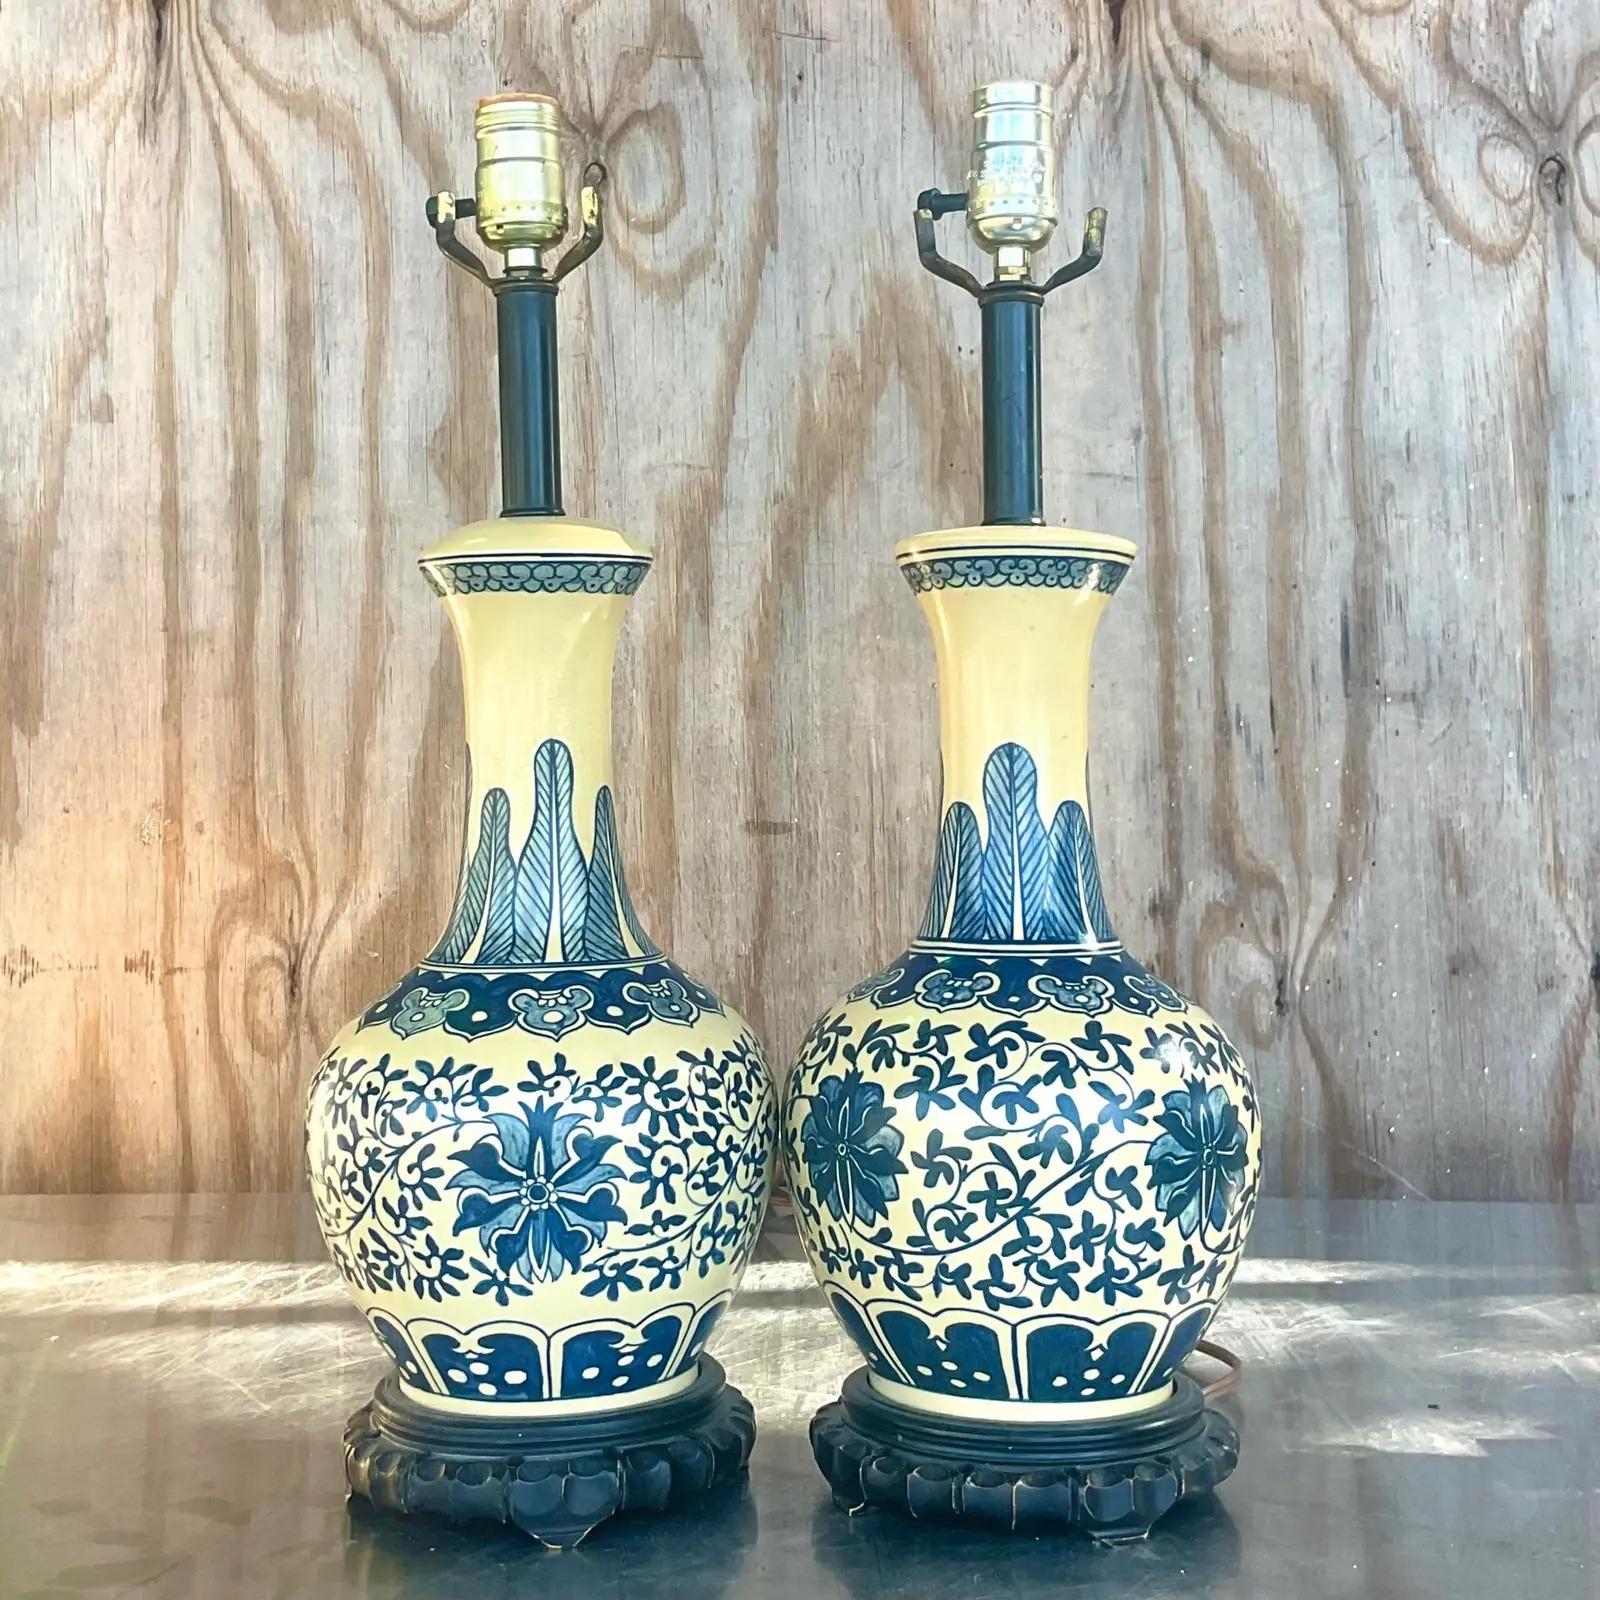 Fantastic pair of vintage Glazed ceramic table lamps. Beautiful hand painted blue design on a cream background. Acquired from a Palm beach estate.

The lamps are in great vintage condition. Minor scuffs and blemishes appropriate to their age and